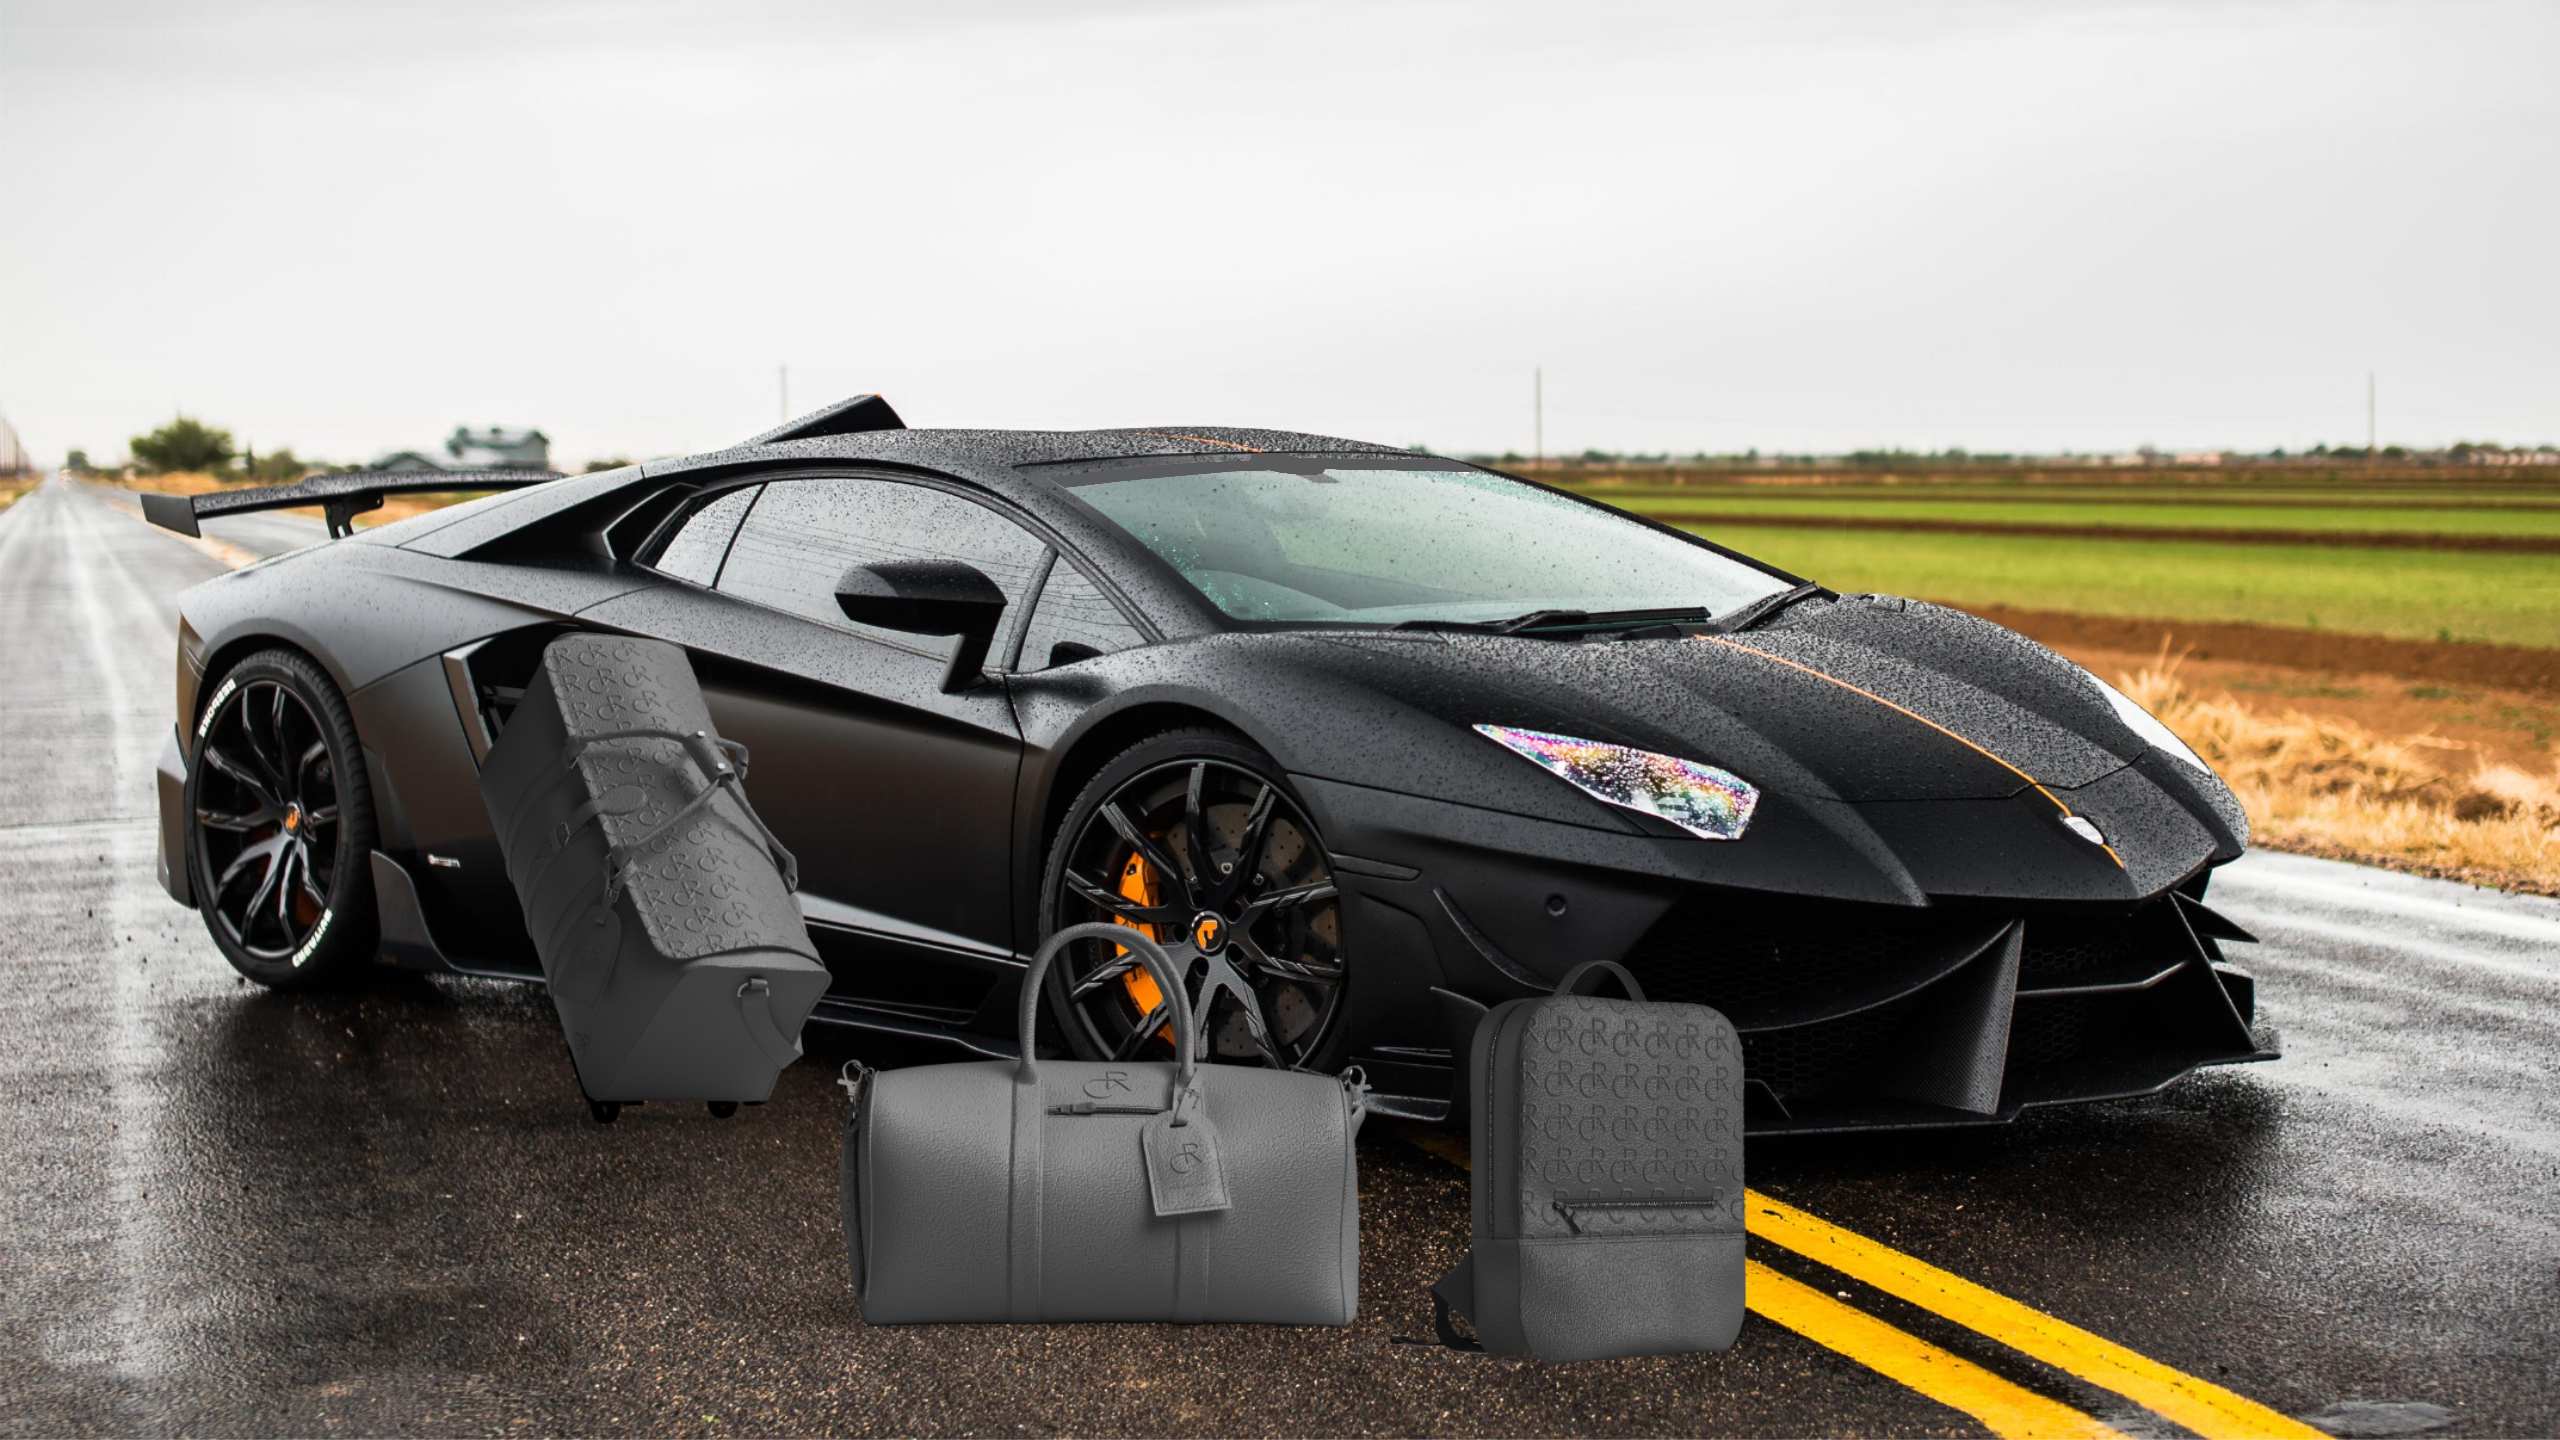 Lamborghini Aventador S Travel Bag Set: Duffle Bag, Back-Pack & Rolling  Carry-On Trolley Luggage: Fits into the OEM Roadster - DMC